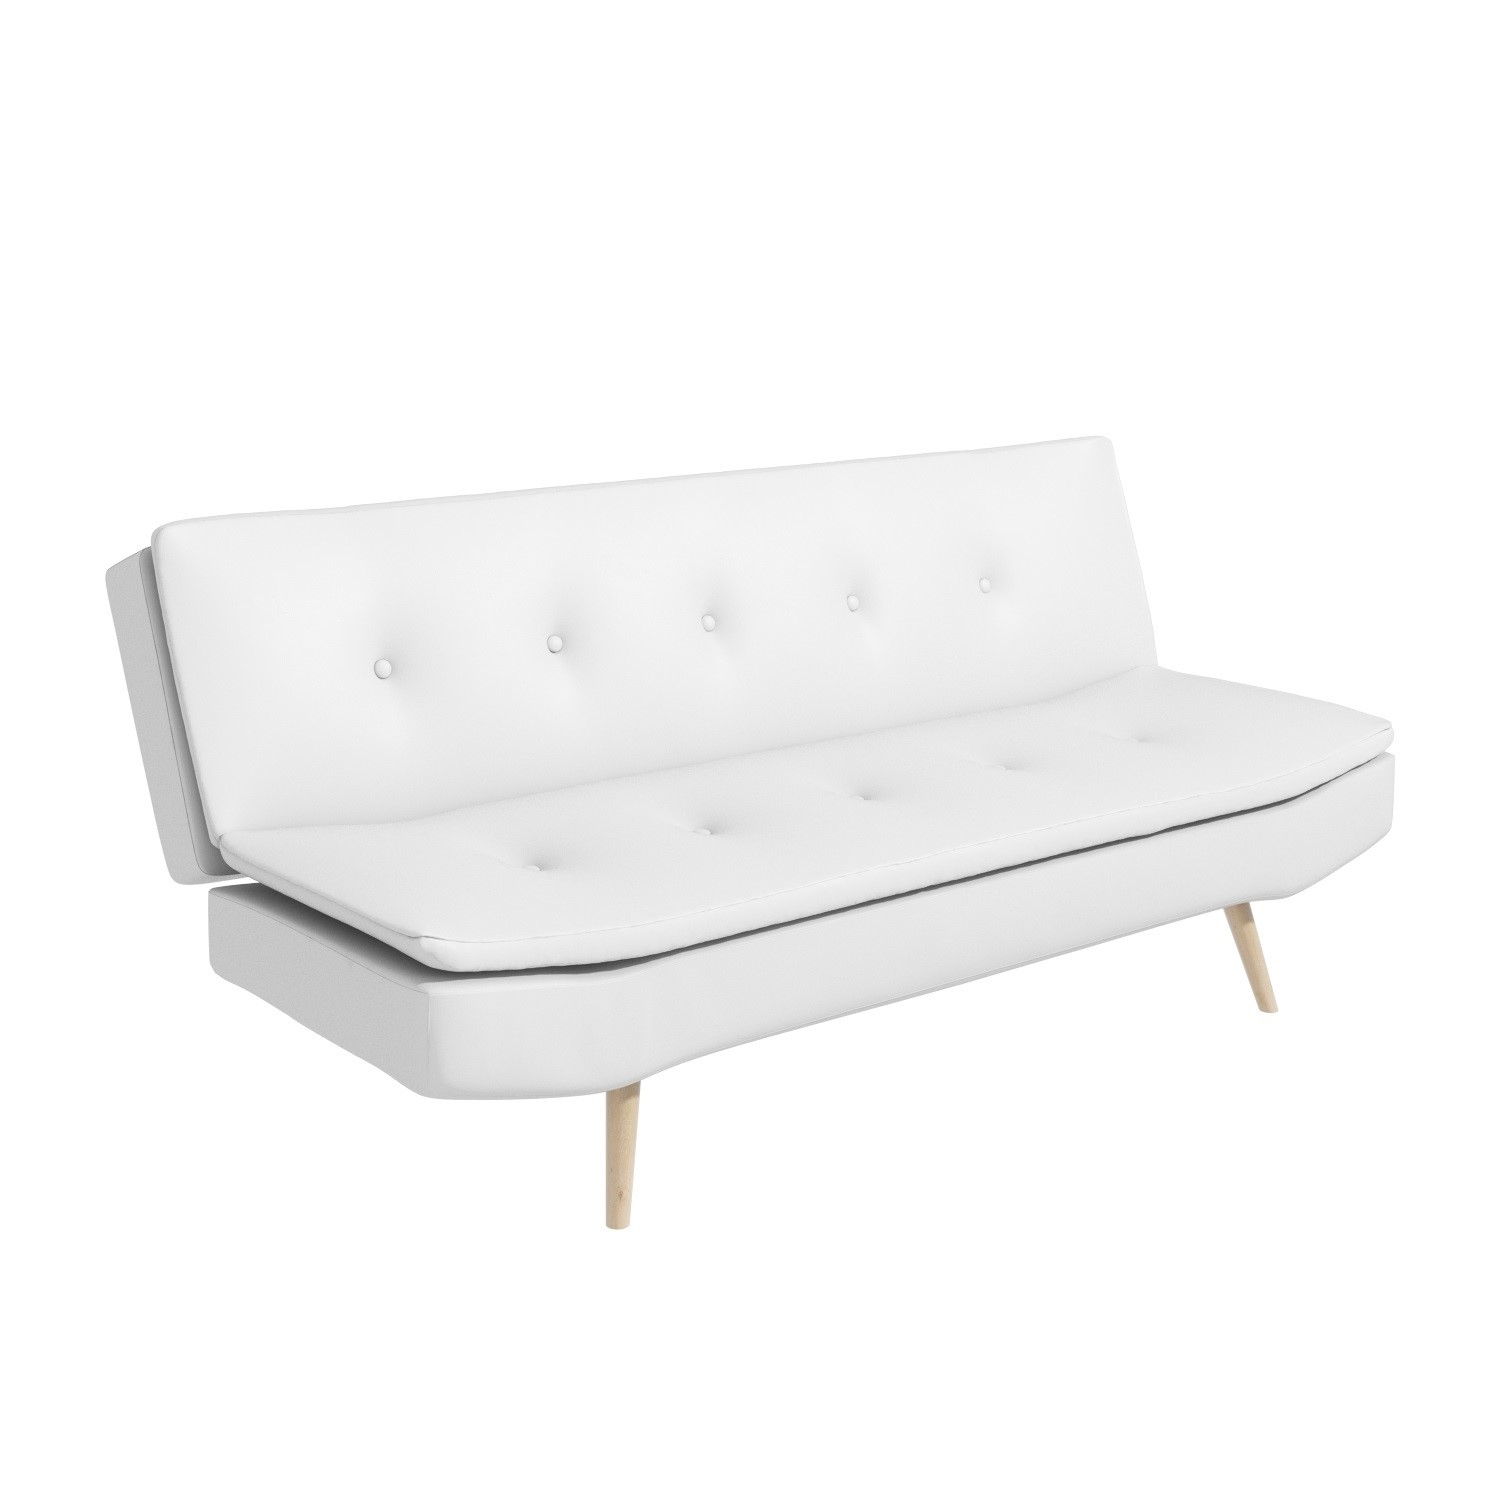 Barker White Faux Leather Sleeper Sofa, White Leather Bed Sofa